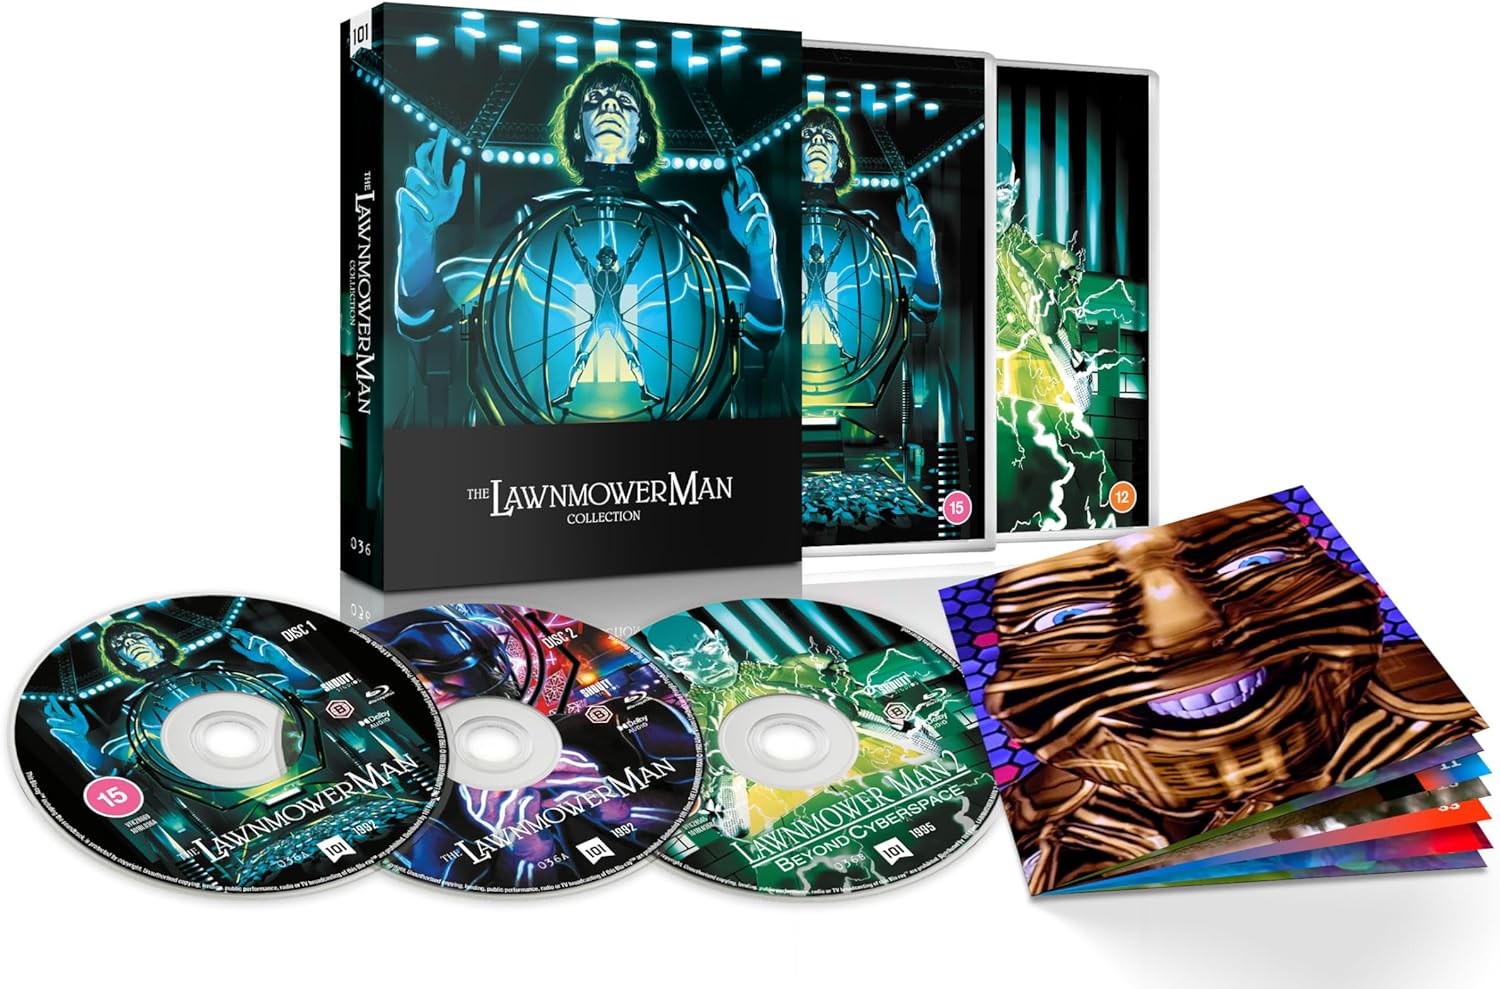 THE LAWNMOWER MAN COLLECTION (REGION B IMPORT - LIMITED EDITION) BLU-RAY [PRE-ORDER]